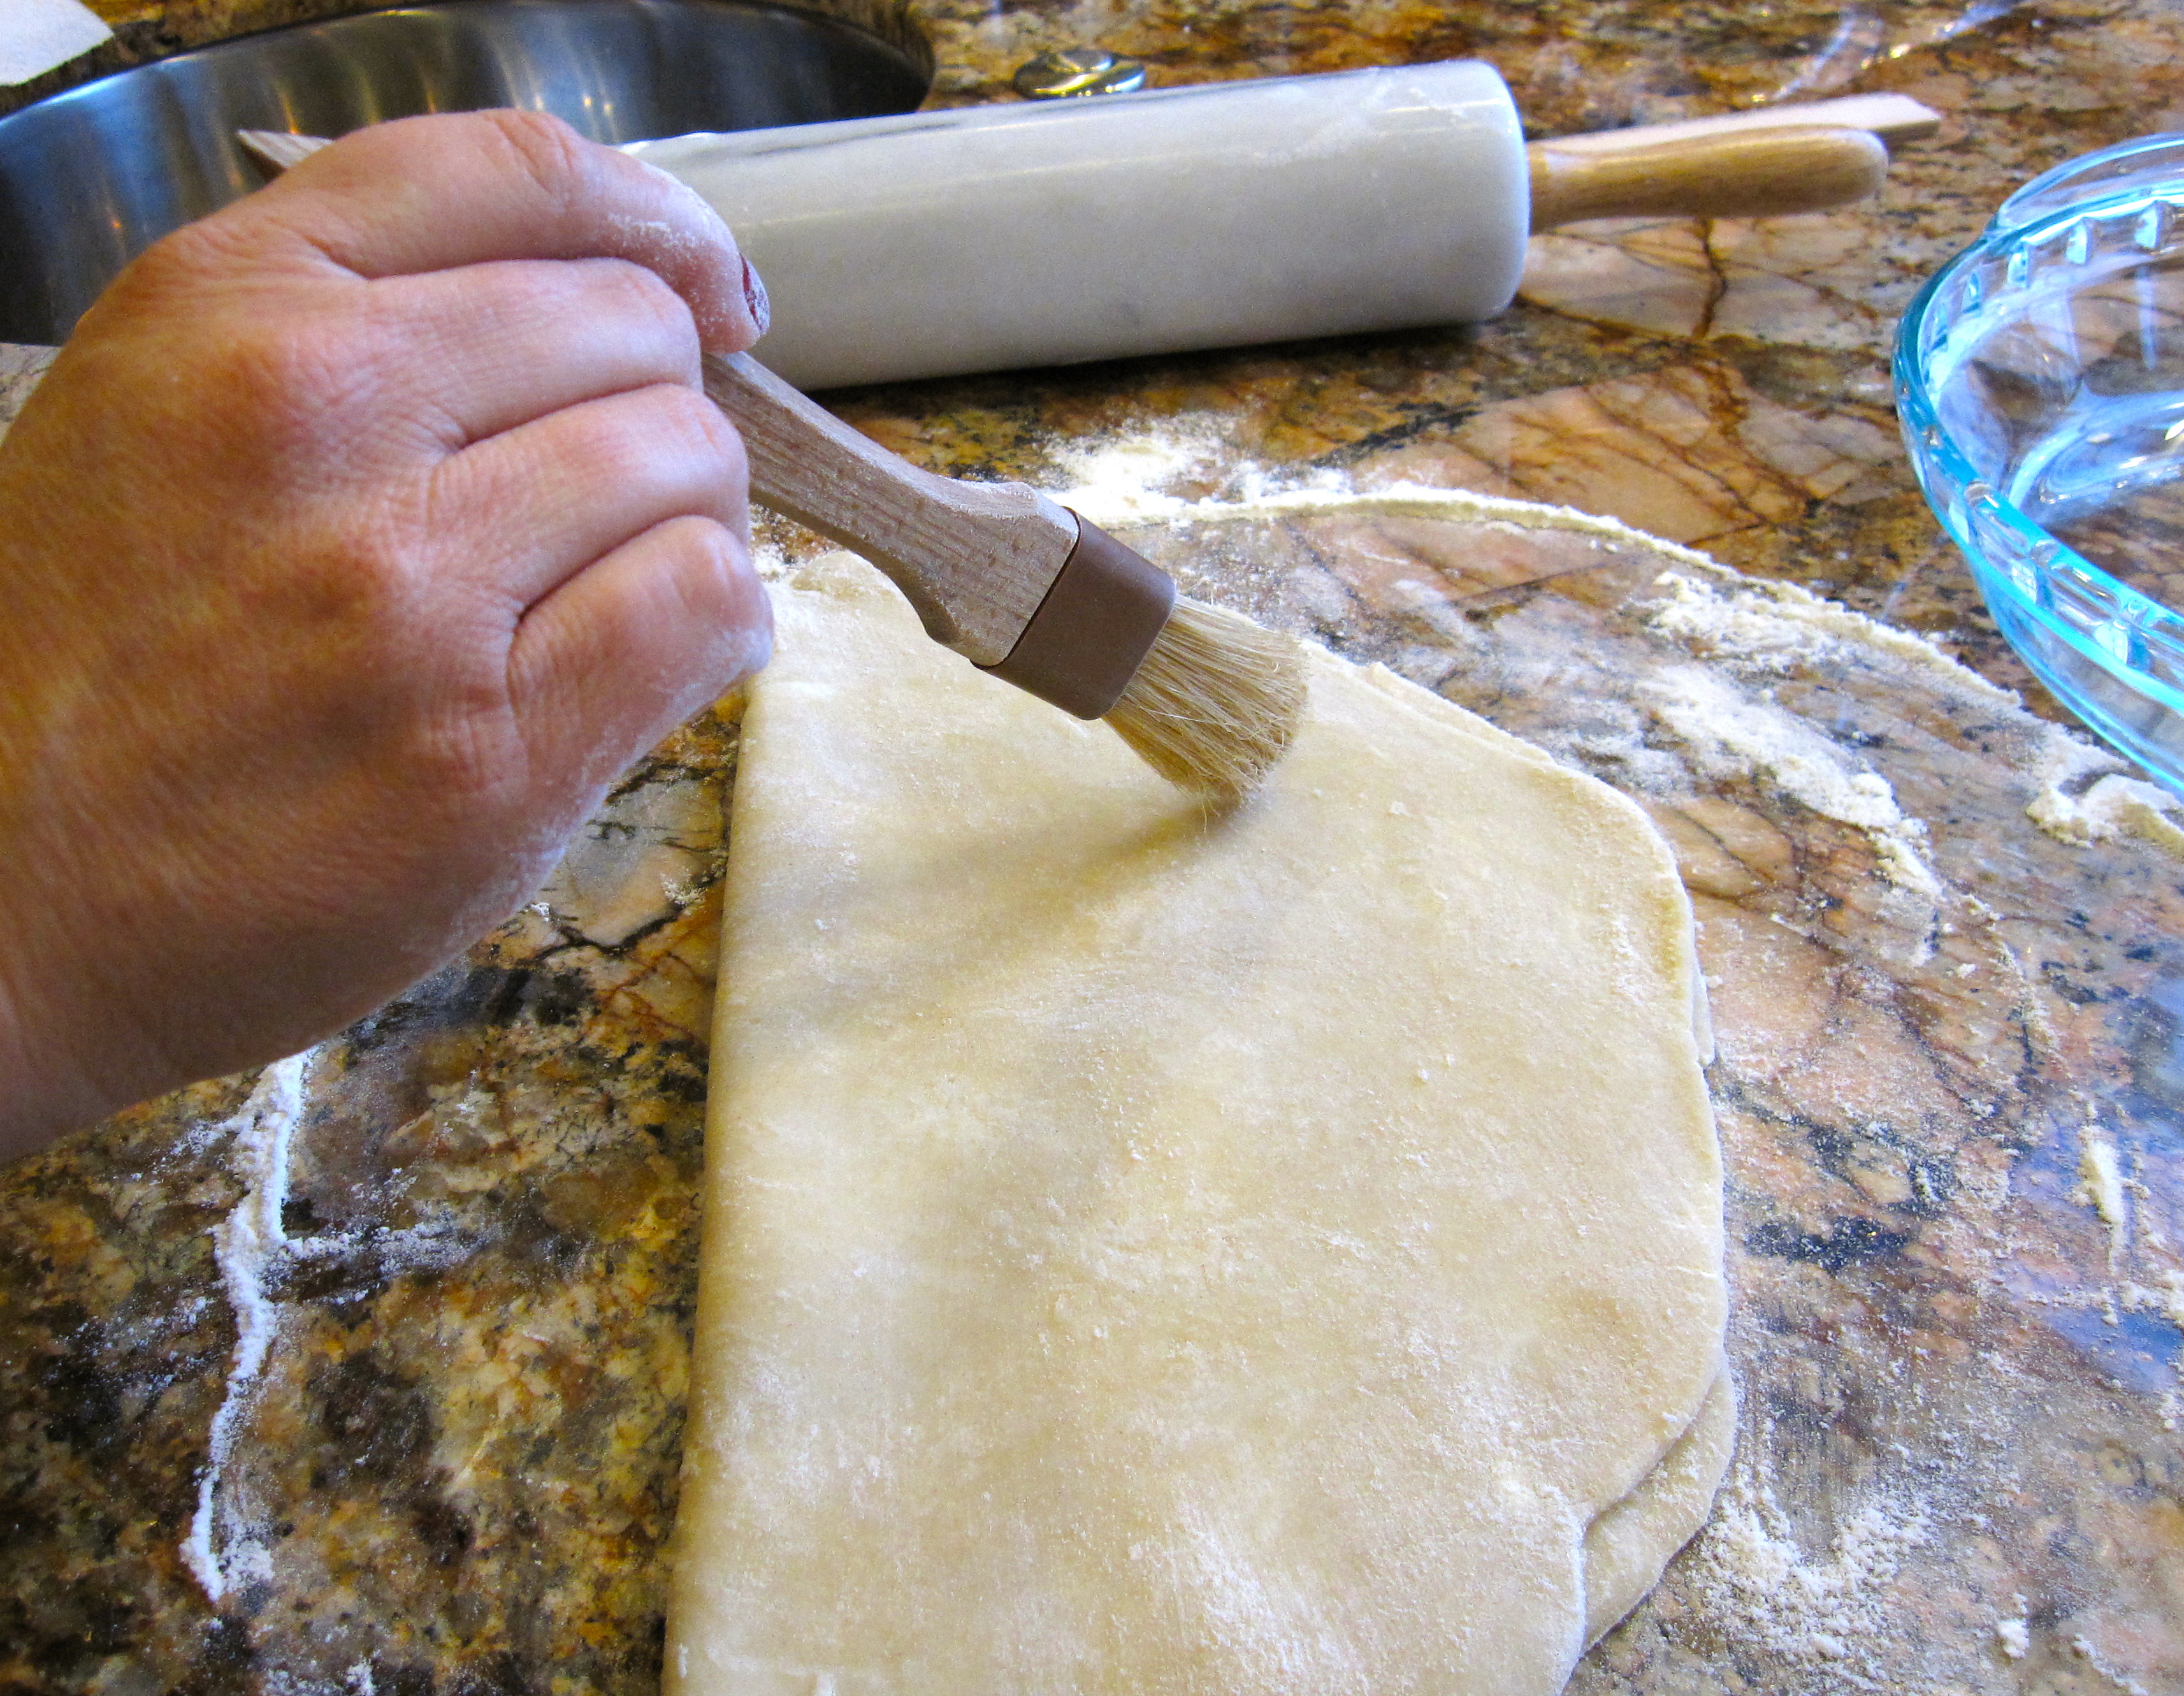 Using a brush, removing excess flour from folded in half circle of pie dough on counter.